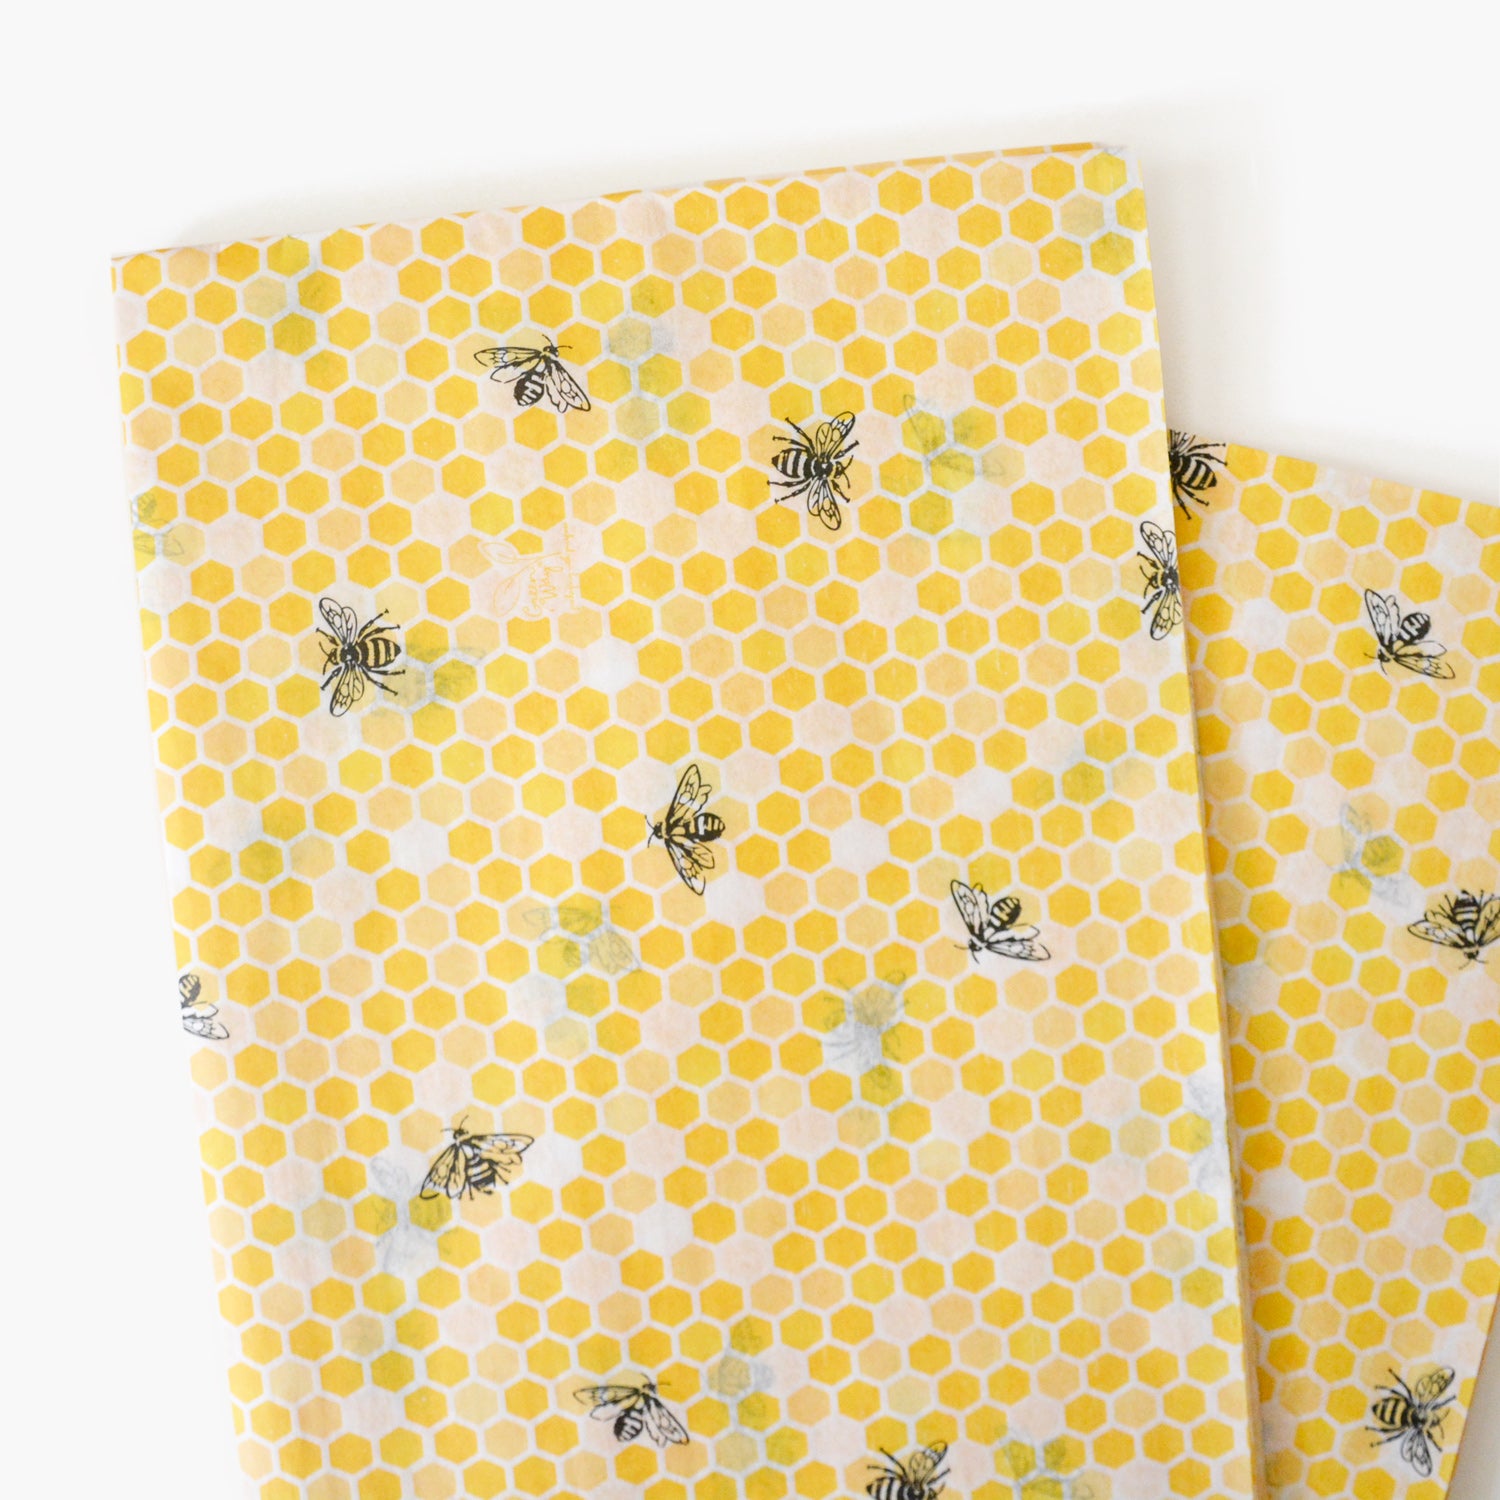 Honey Bees Patterned Tissue Paper - Holiday Gift Wrapping & Christmas DIY  Projects Supplies - GenWooShop